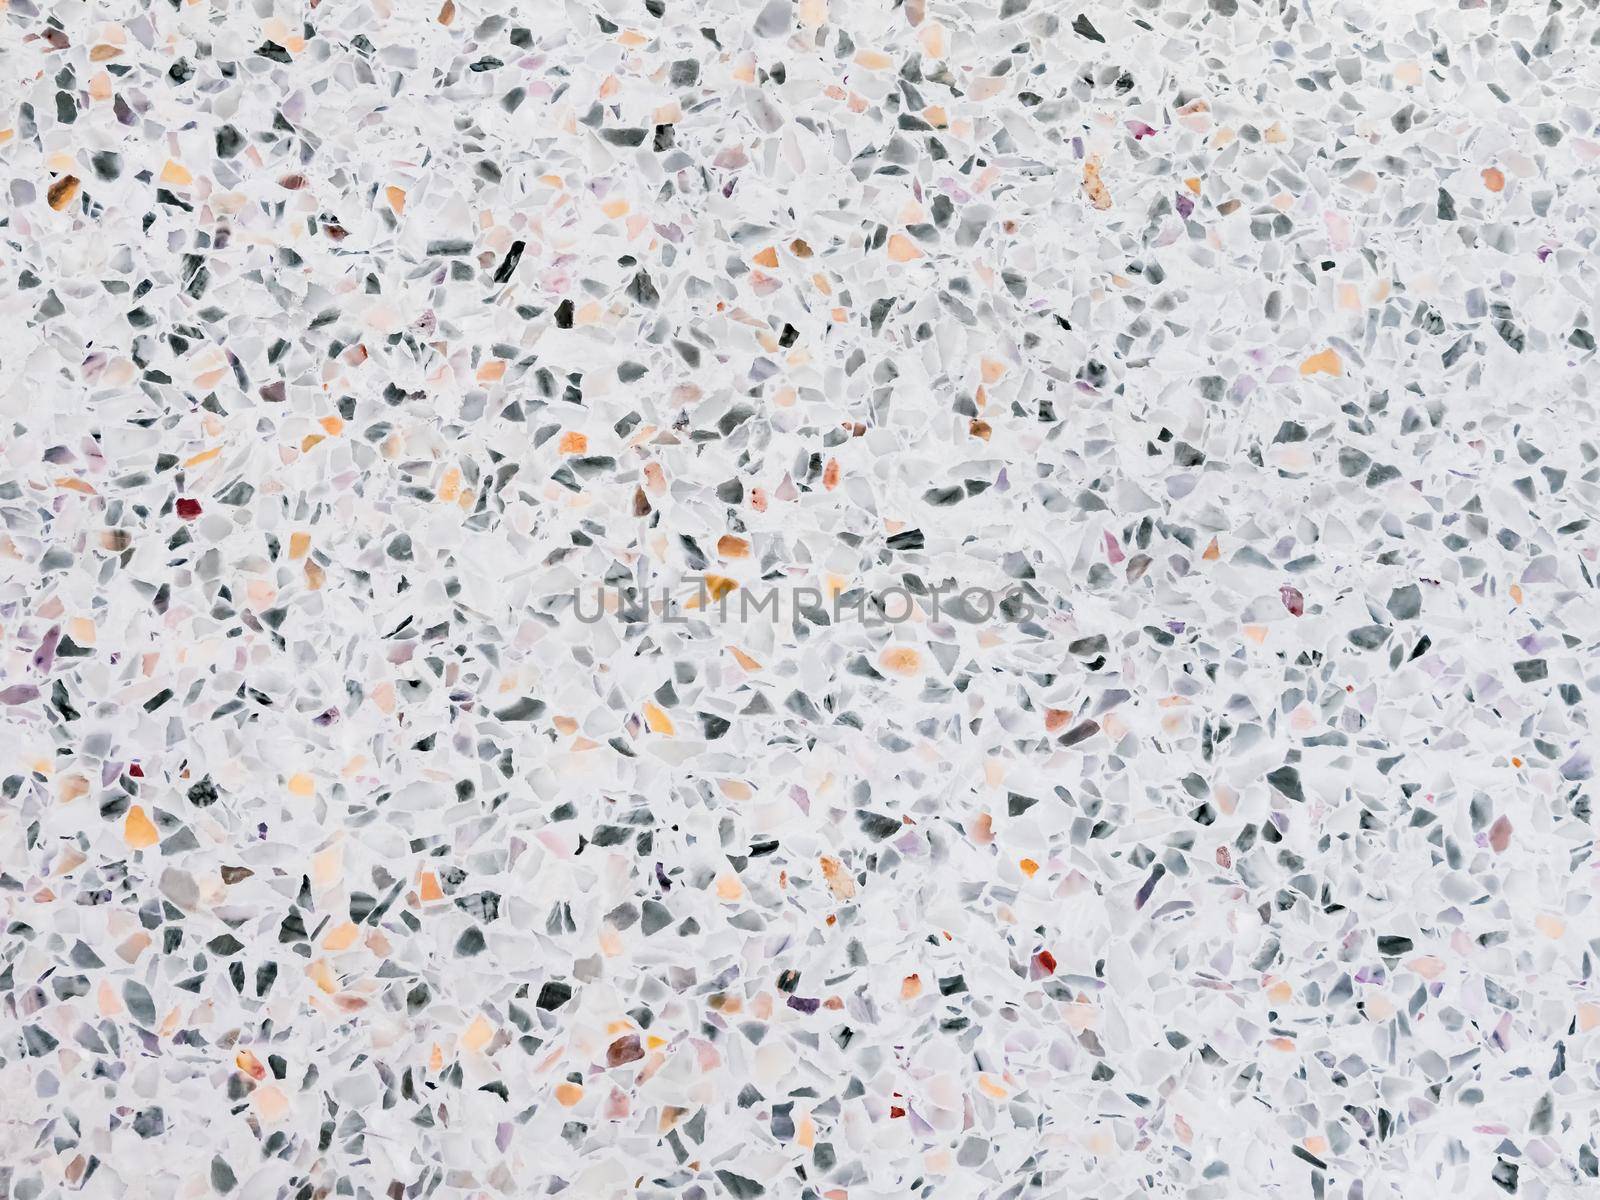 terrazzo floor or marble beautiful old texture, polished stone wall for background